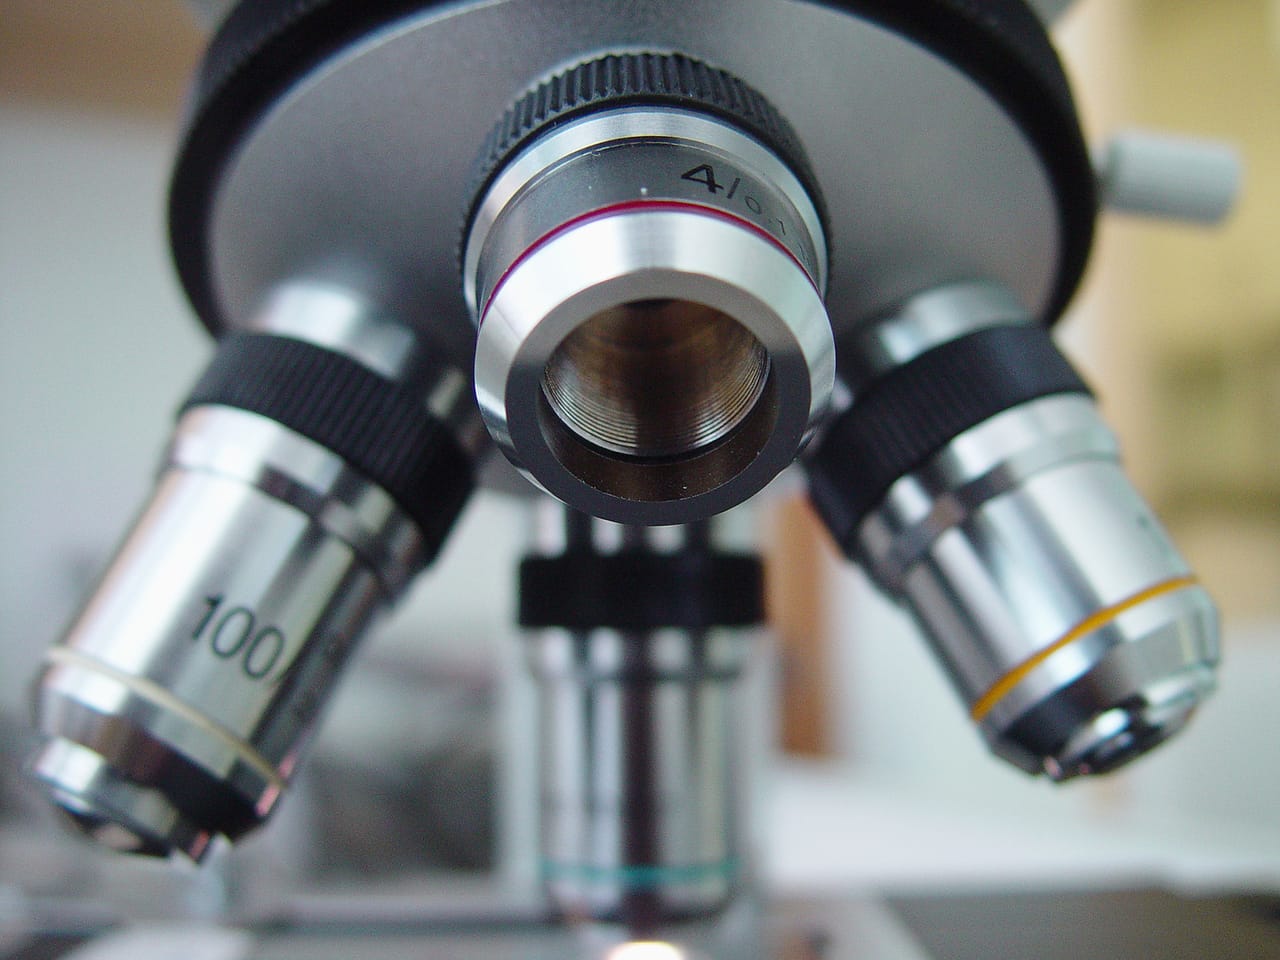 Close-up view of a microscope with three objective lenses labeled 4x, 10x, and 100x, focusing down onto a slide.